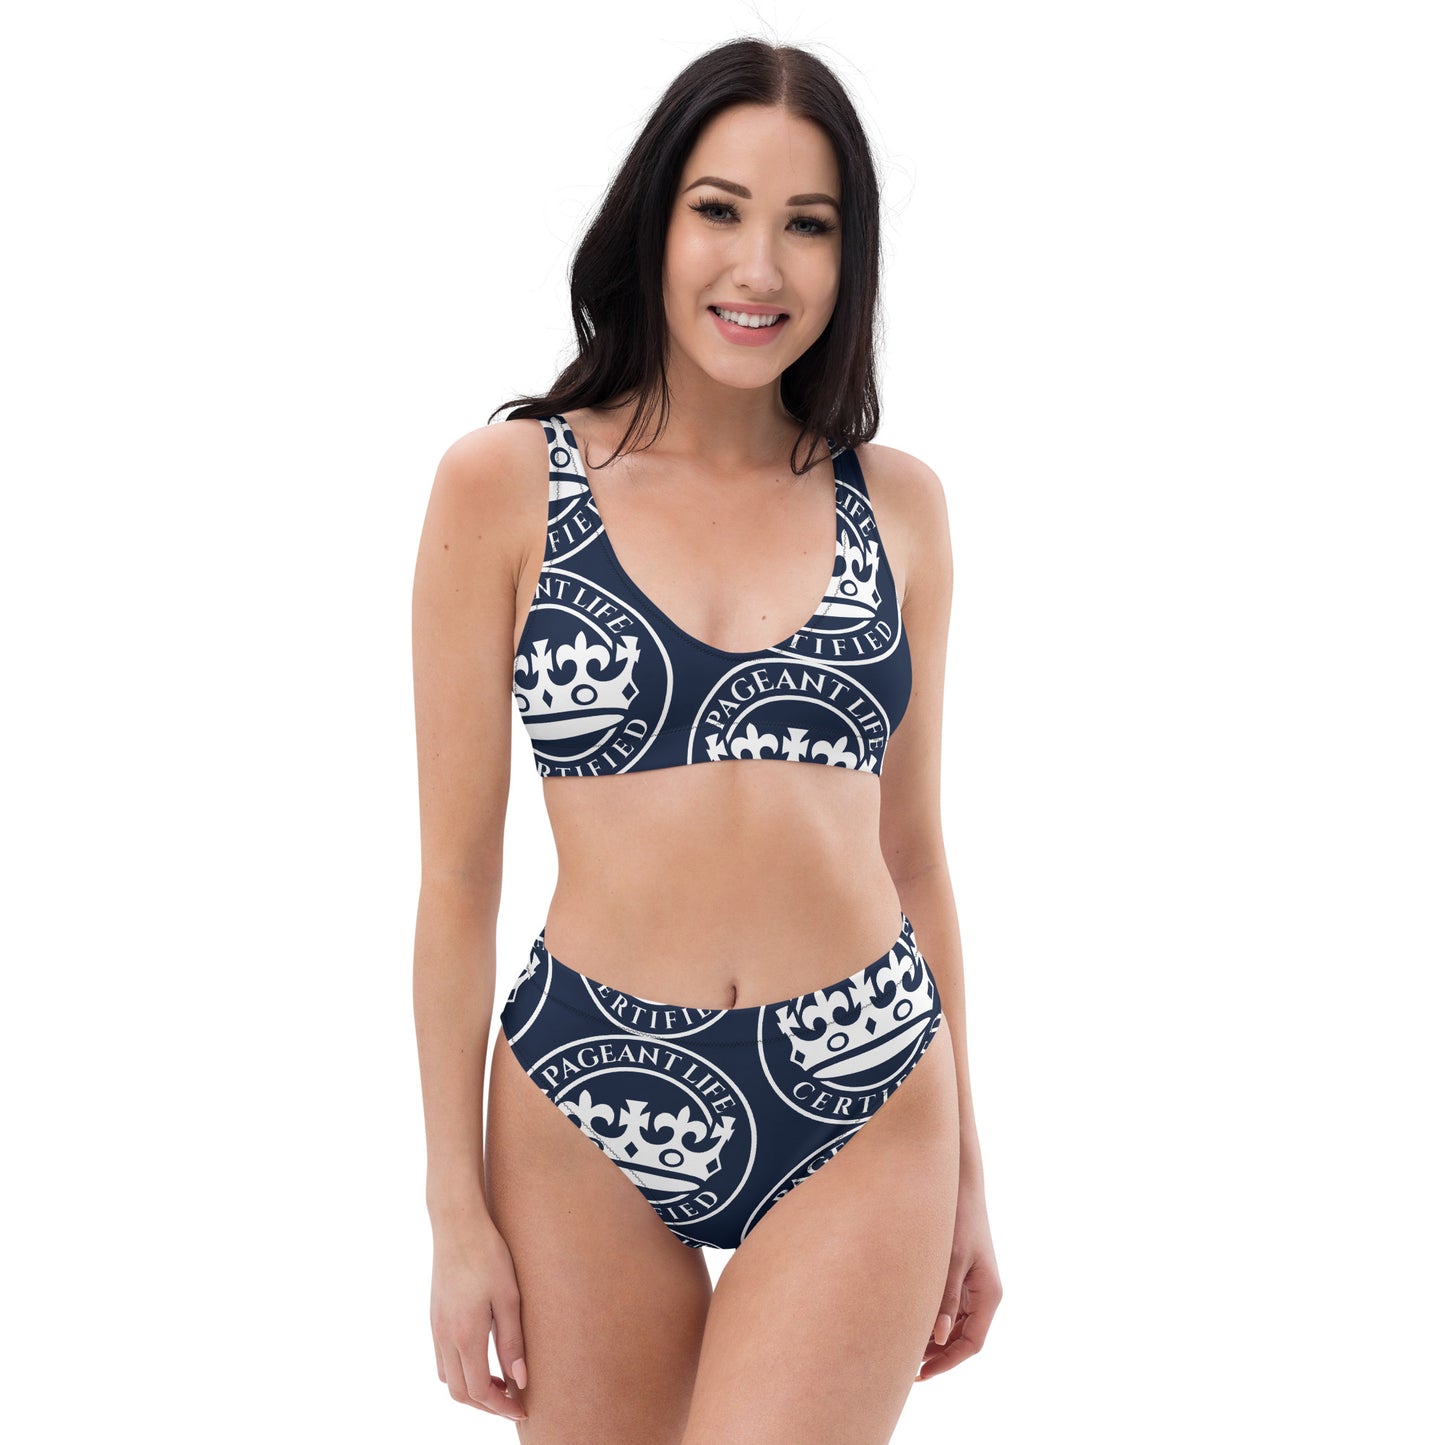 Blue and White Pageant Life Certified high-waisted bikini